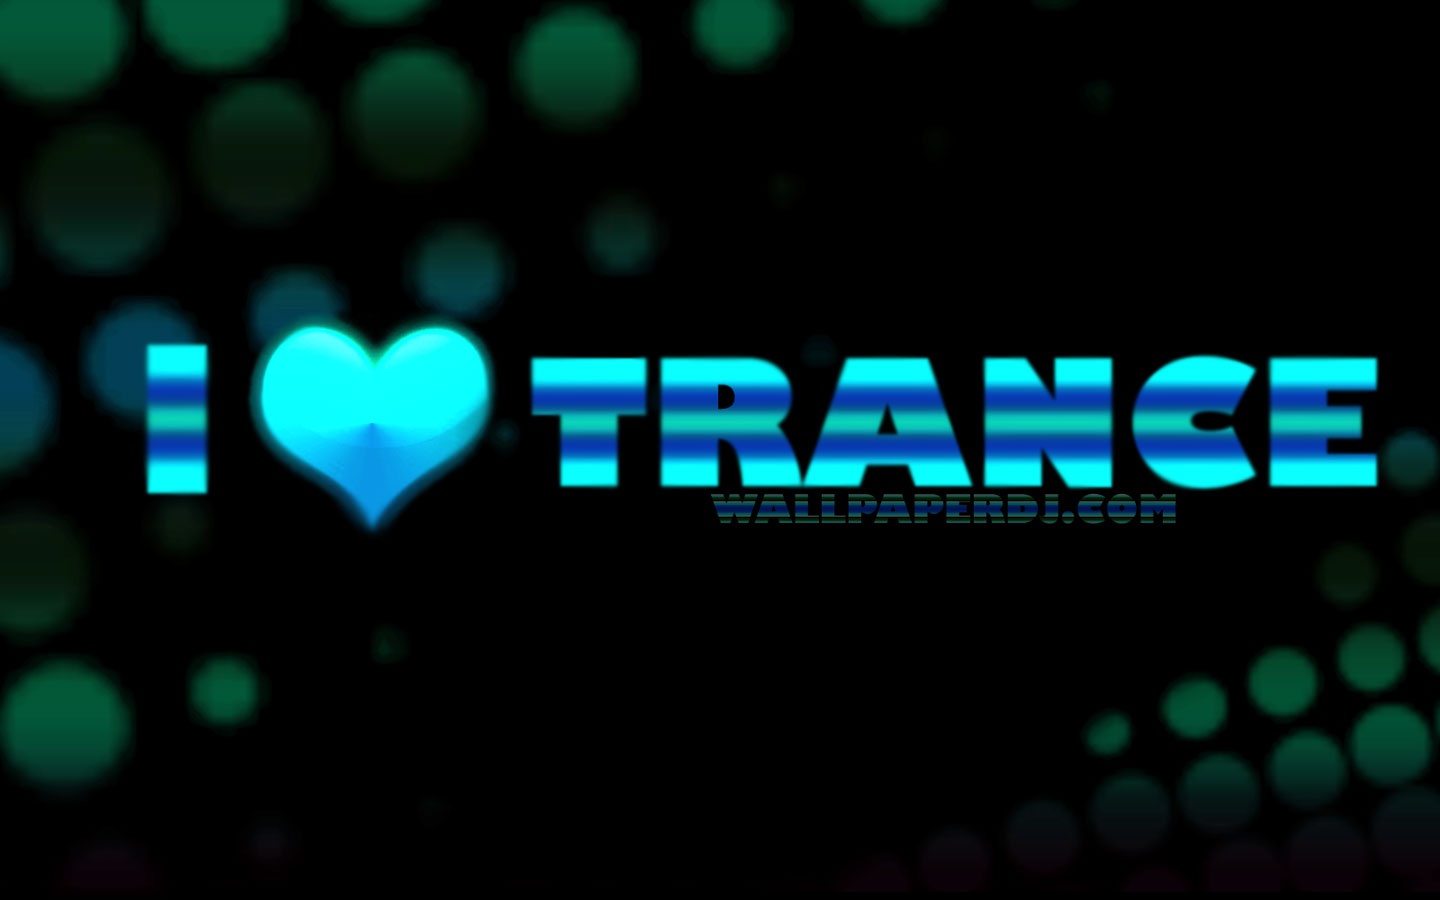 Love Trance Music Wallpaper Typography On An Electric Style Desktop